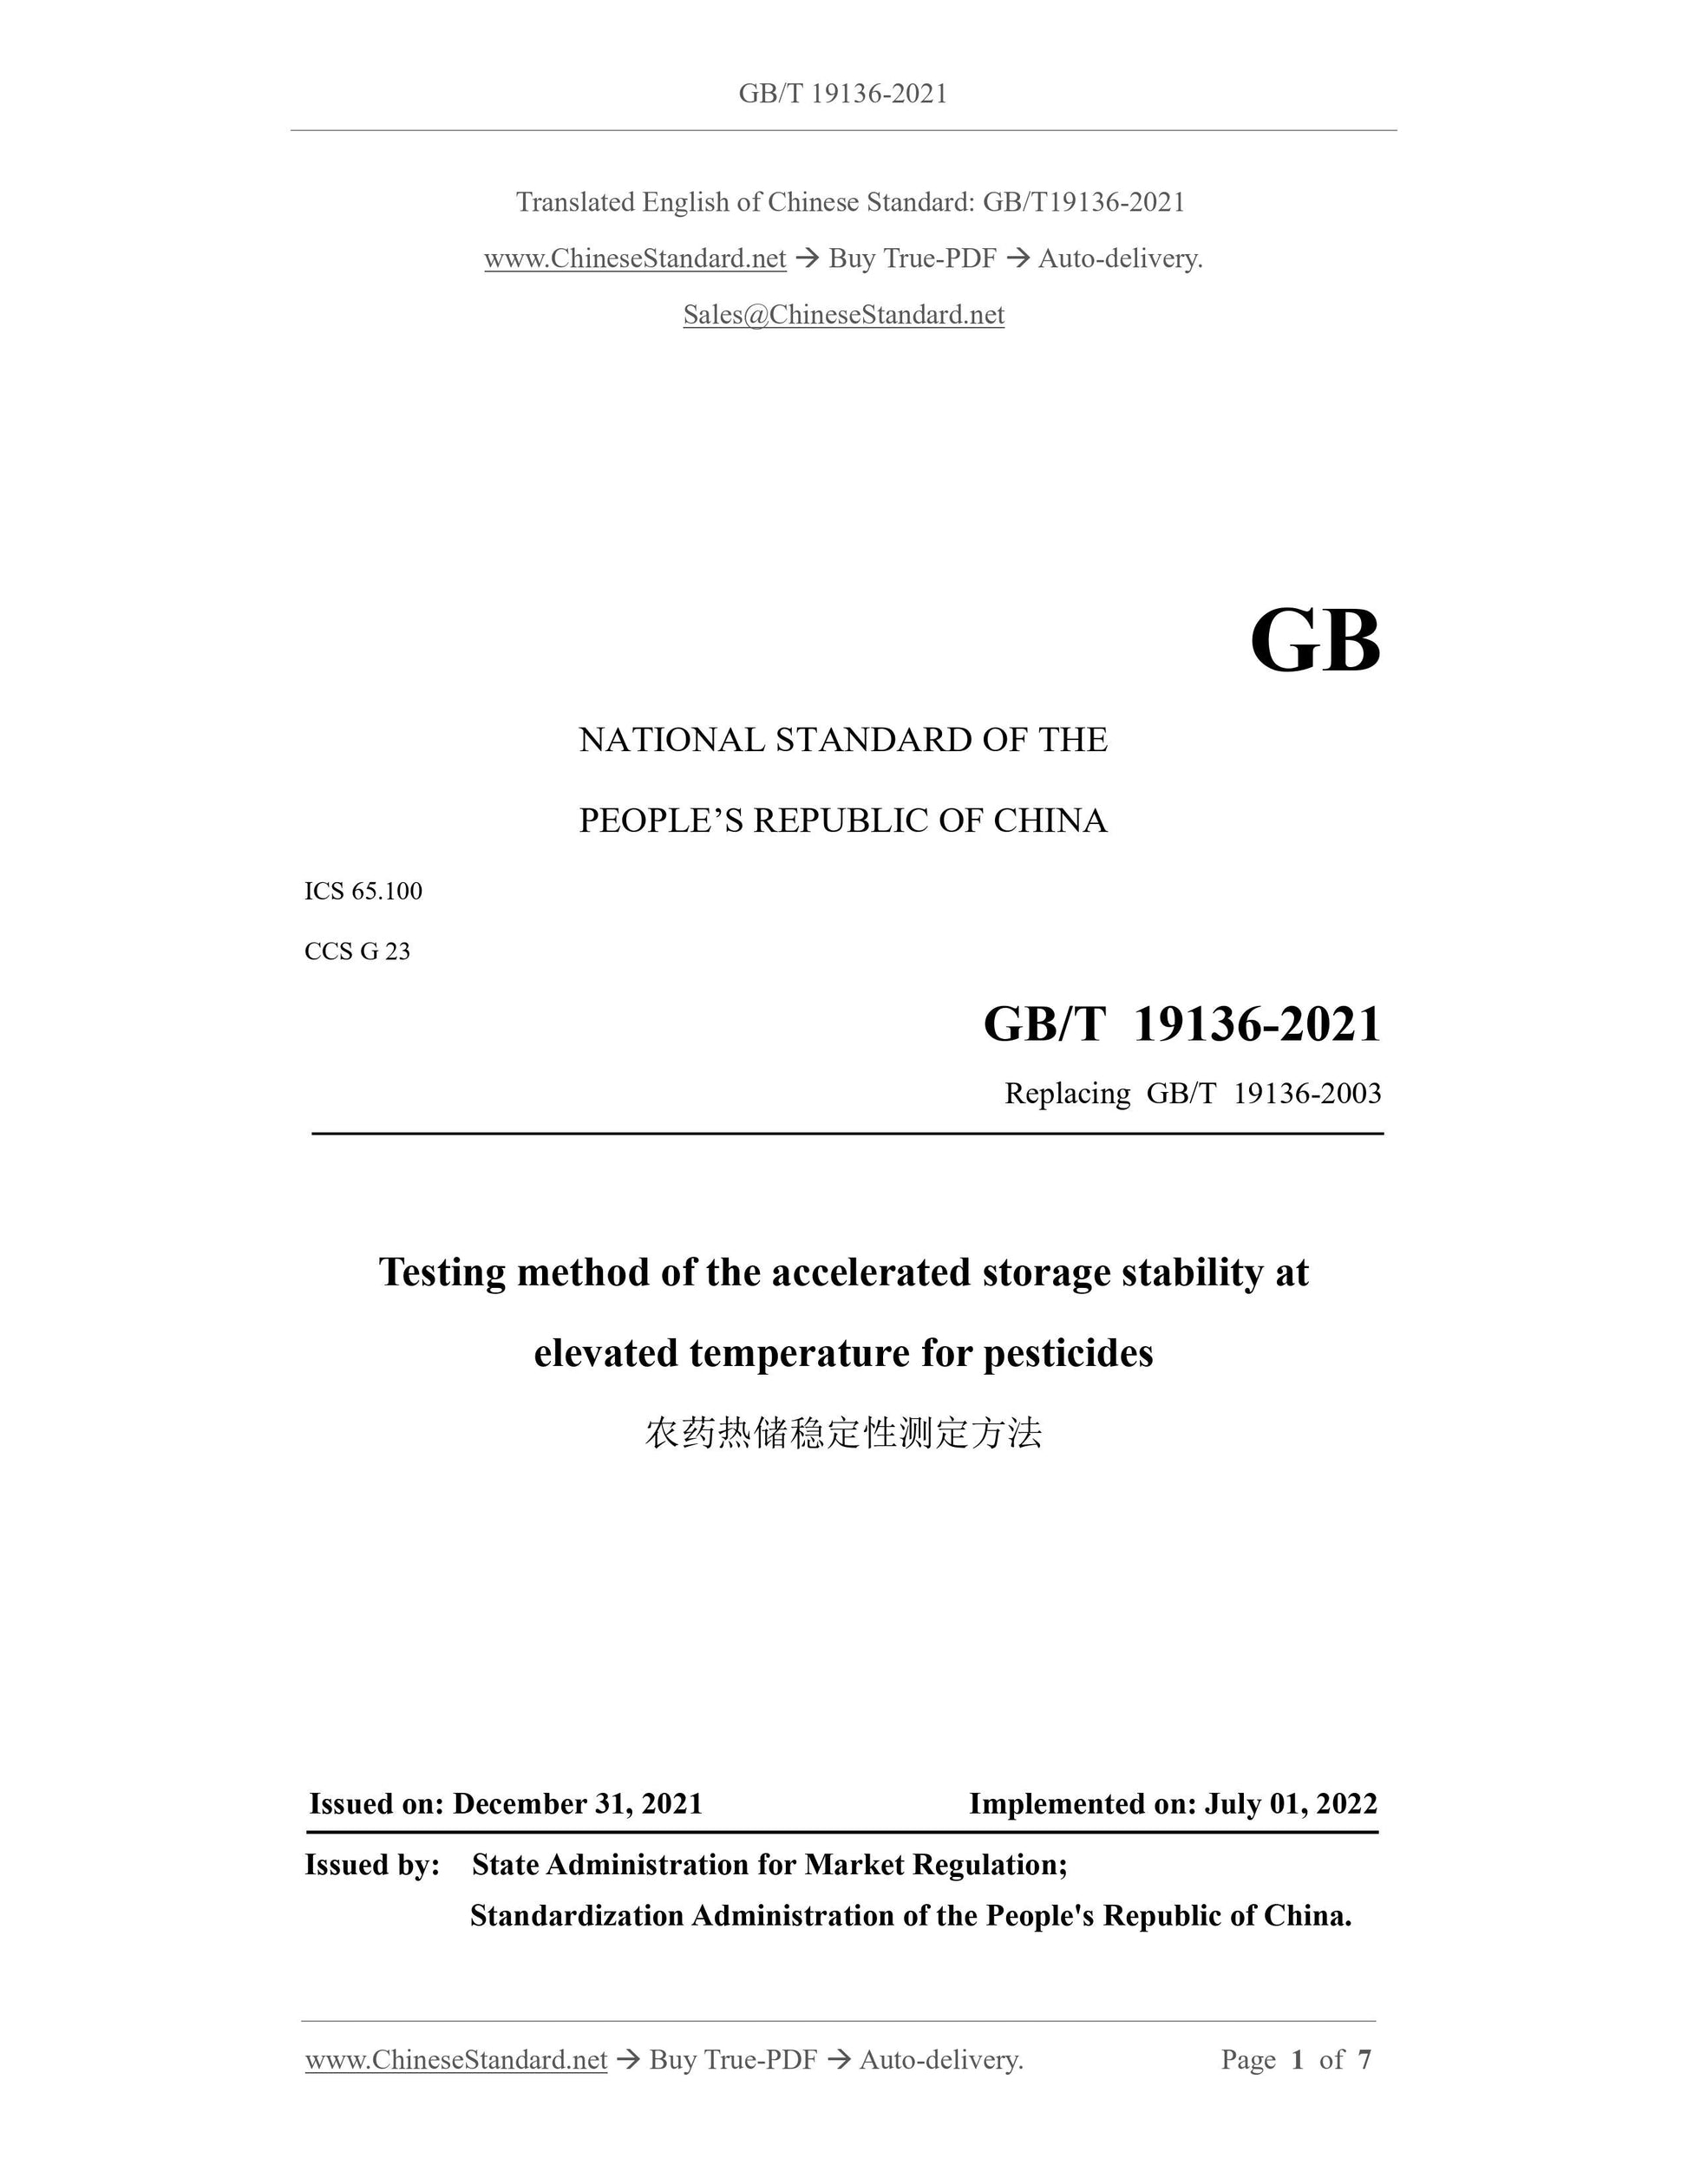 GB/T 19136-2021 Page 1